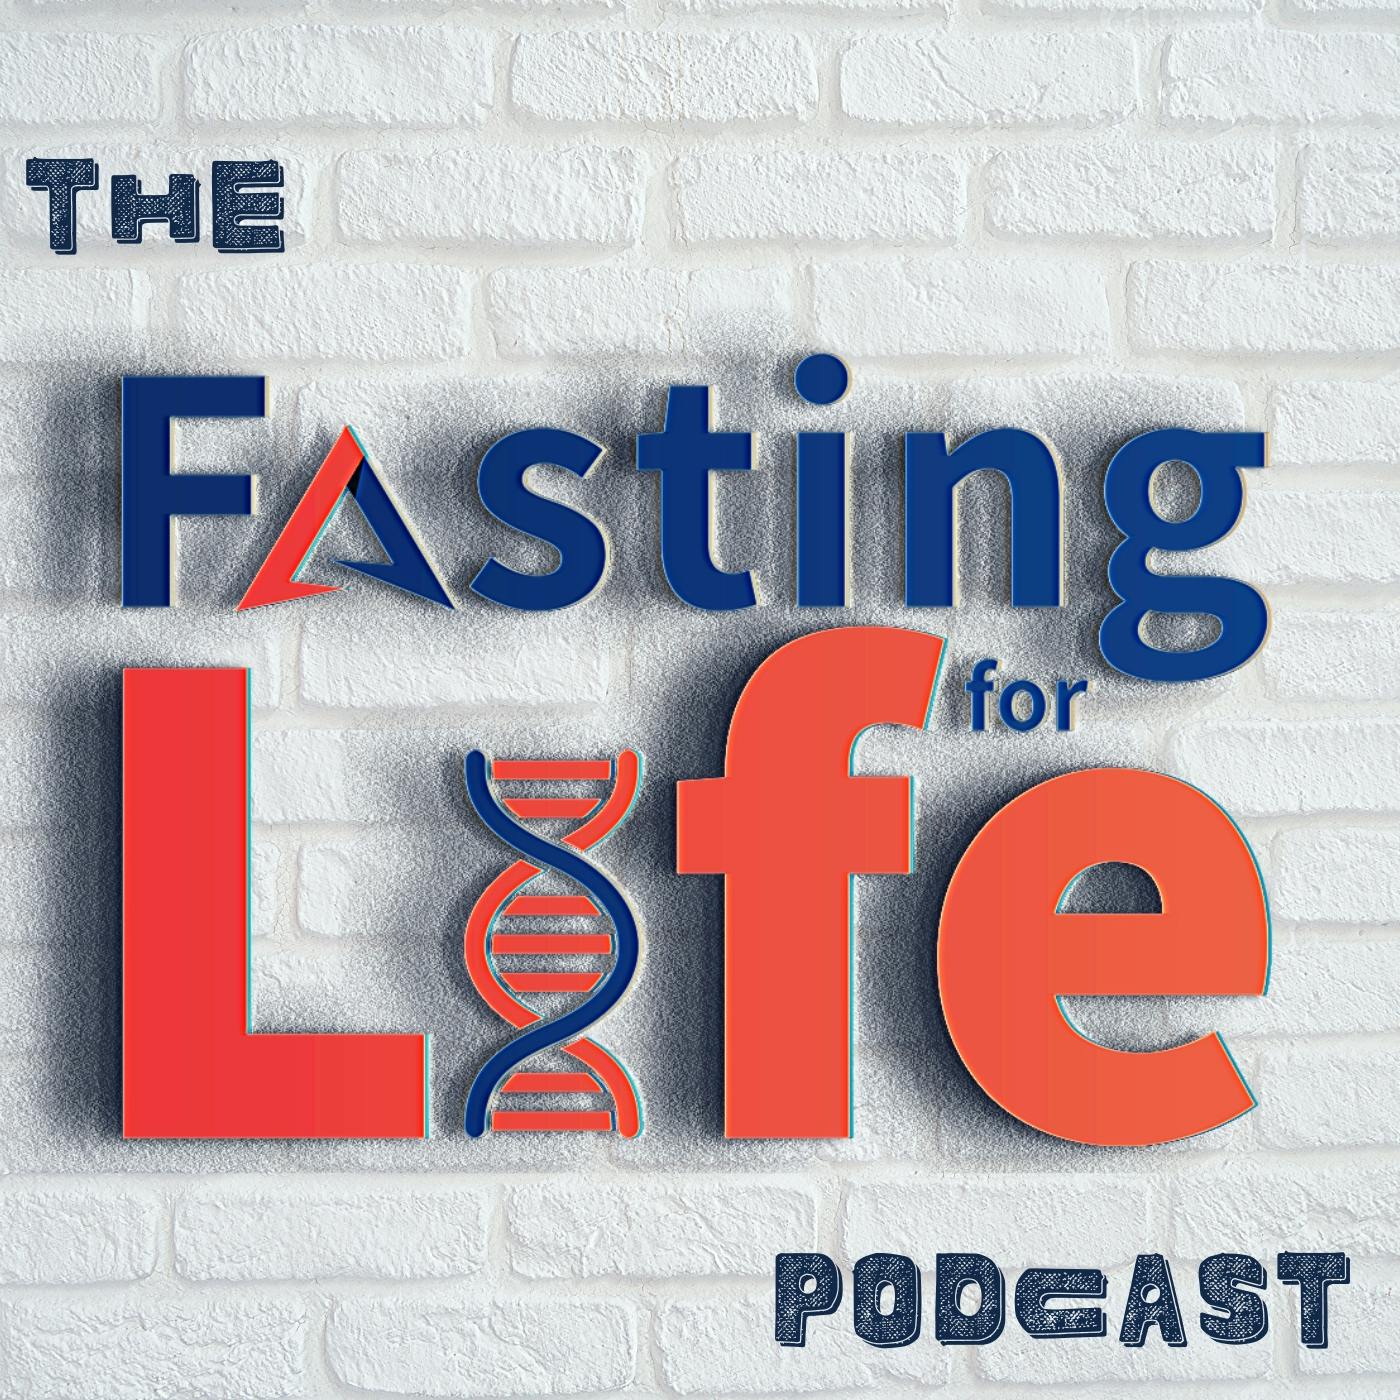 Ep. 196 - What is the ideal fasting schedule for you? | How many meals should you eat & what times are best? | Effects of different meal frequencies on health outcomes | Breakfast: eat or skip? | Bene